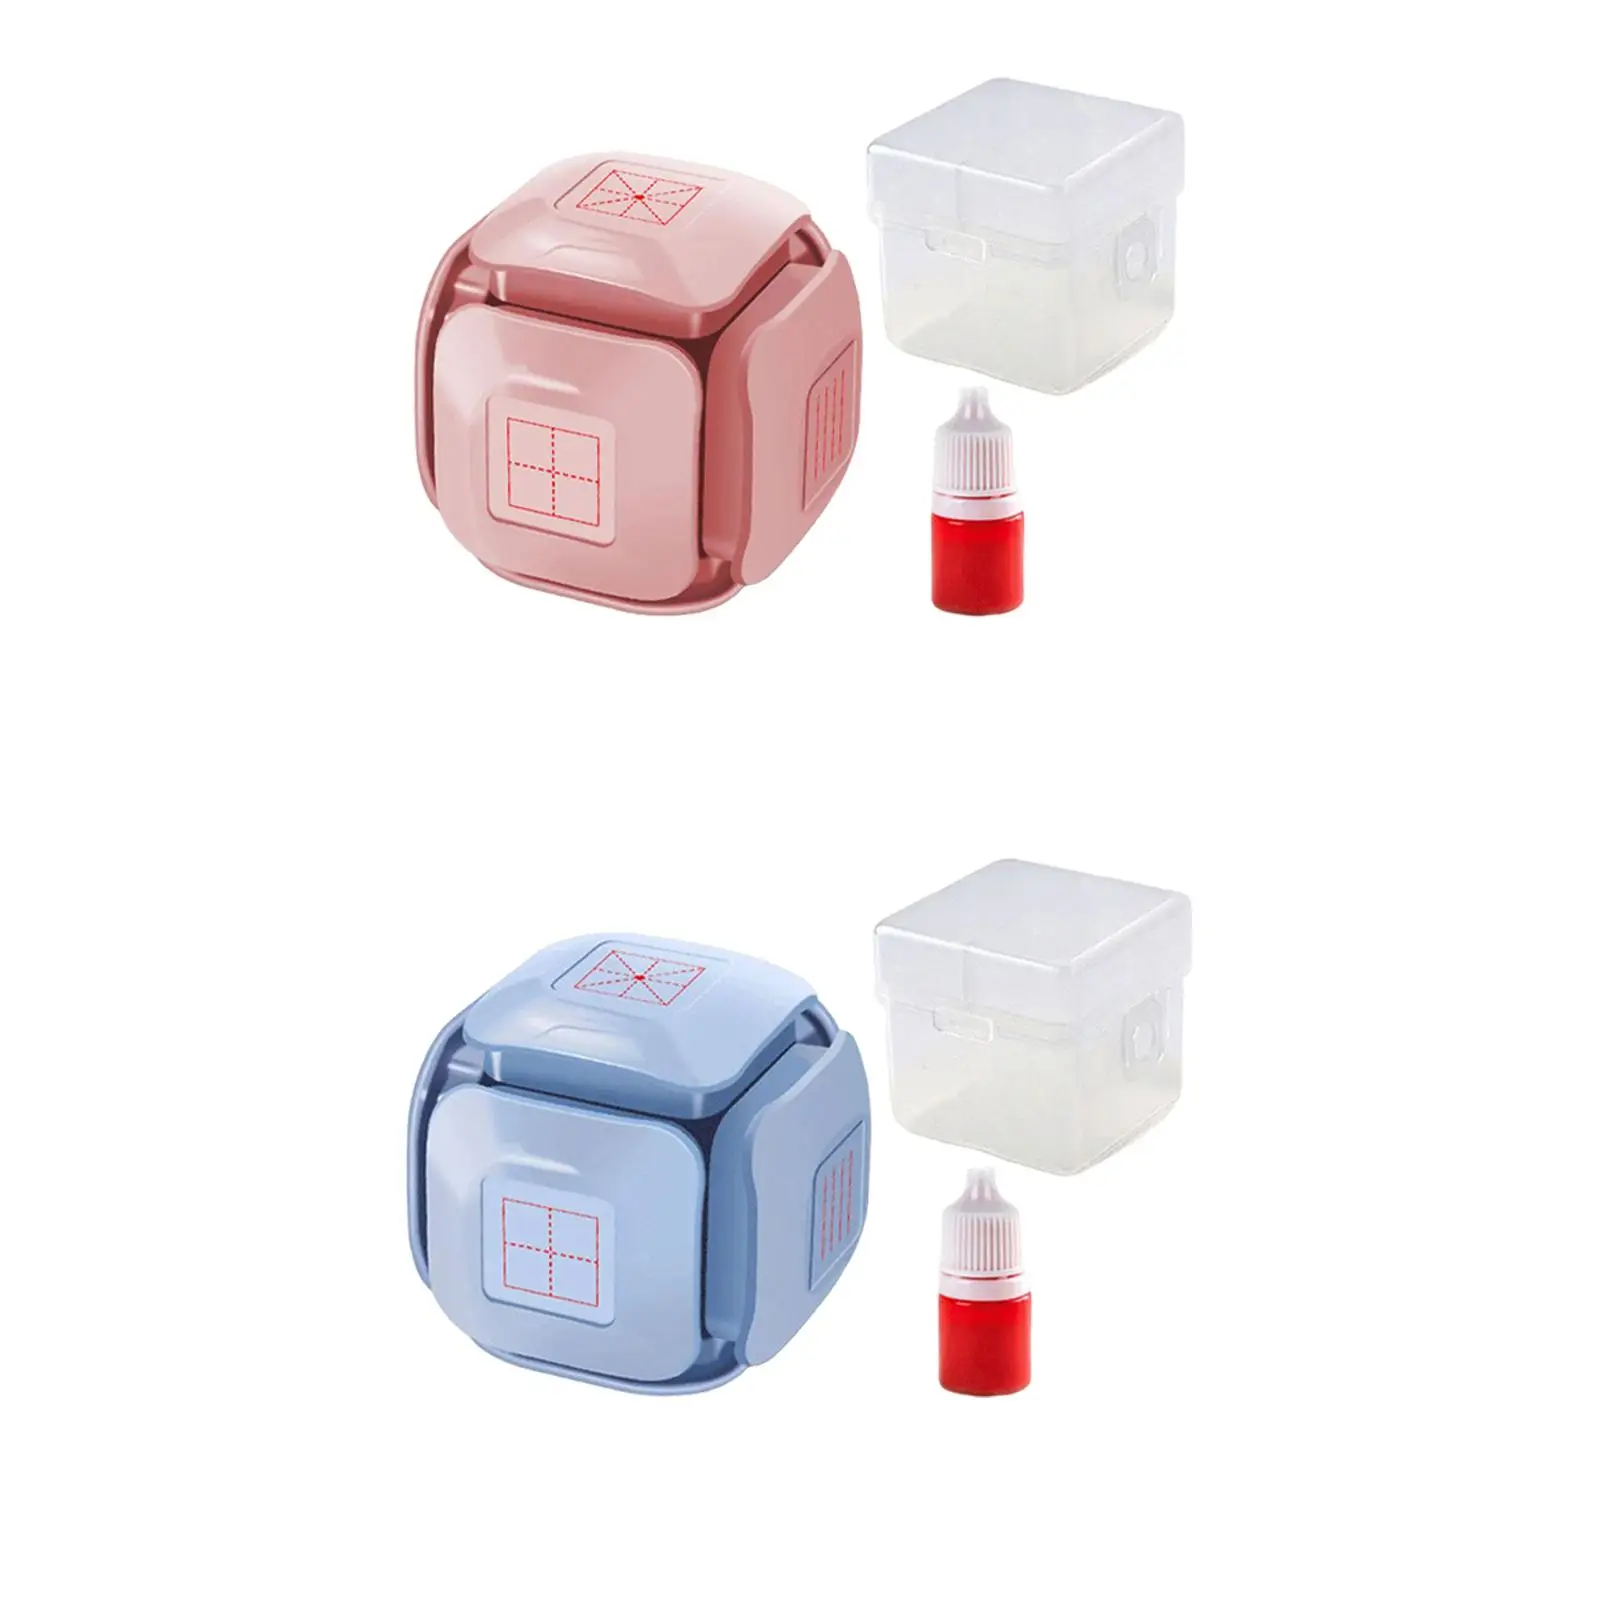 Portable Teaching Stamp Educational Toy Learning Stationery 6 in 1 Primary School Teacher Accessories Parents Children